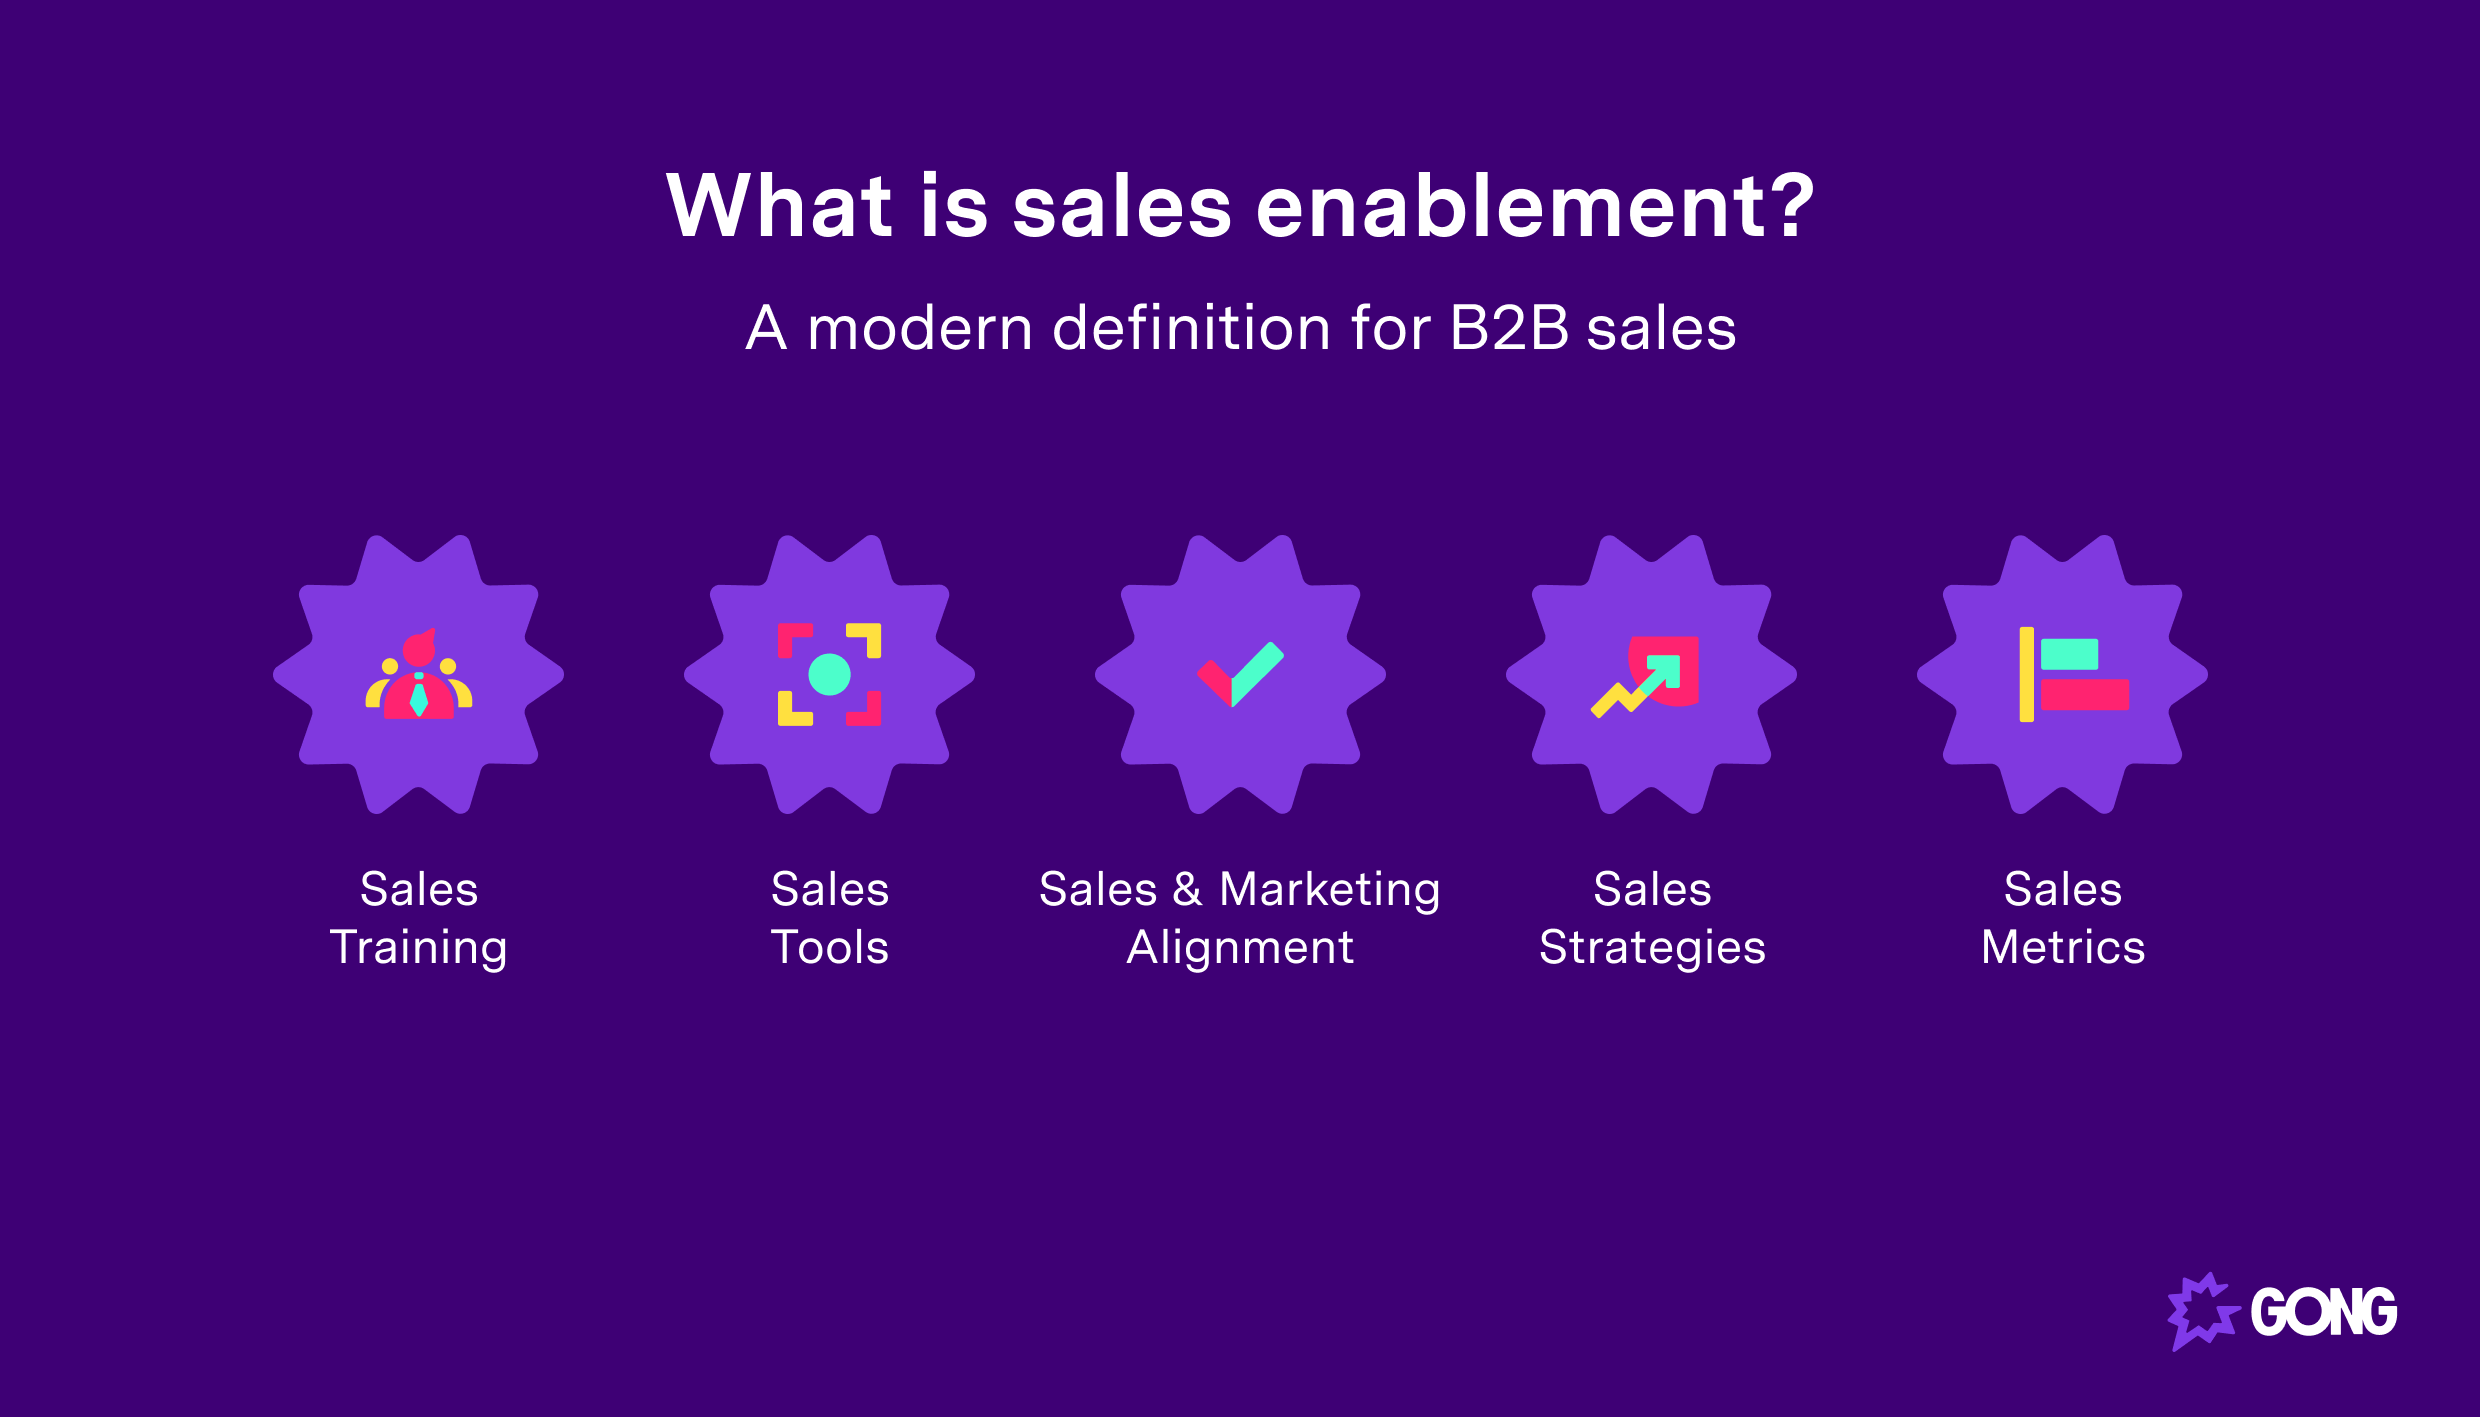 An image showing the various components of sales enablement